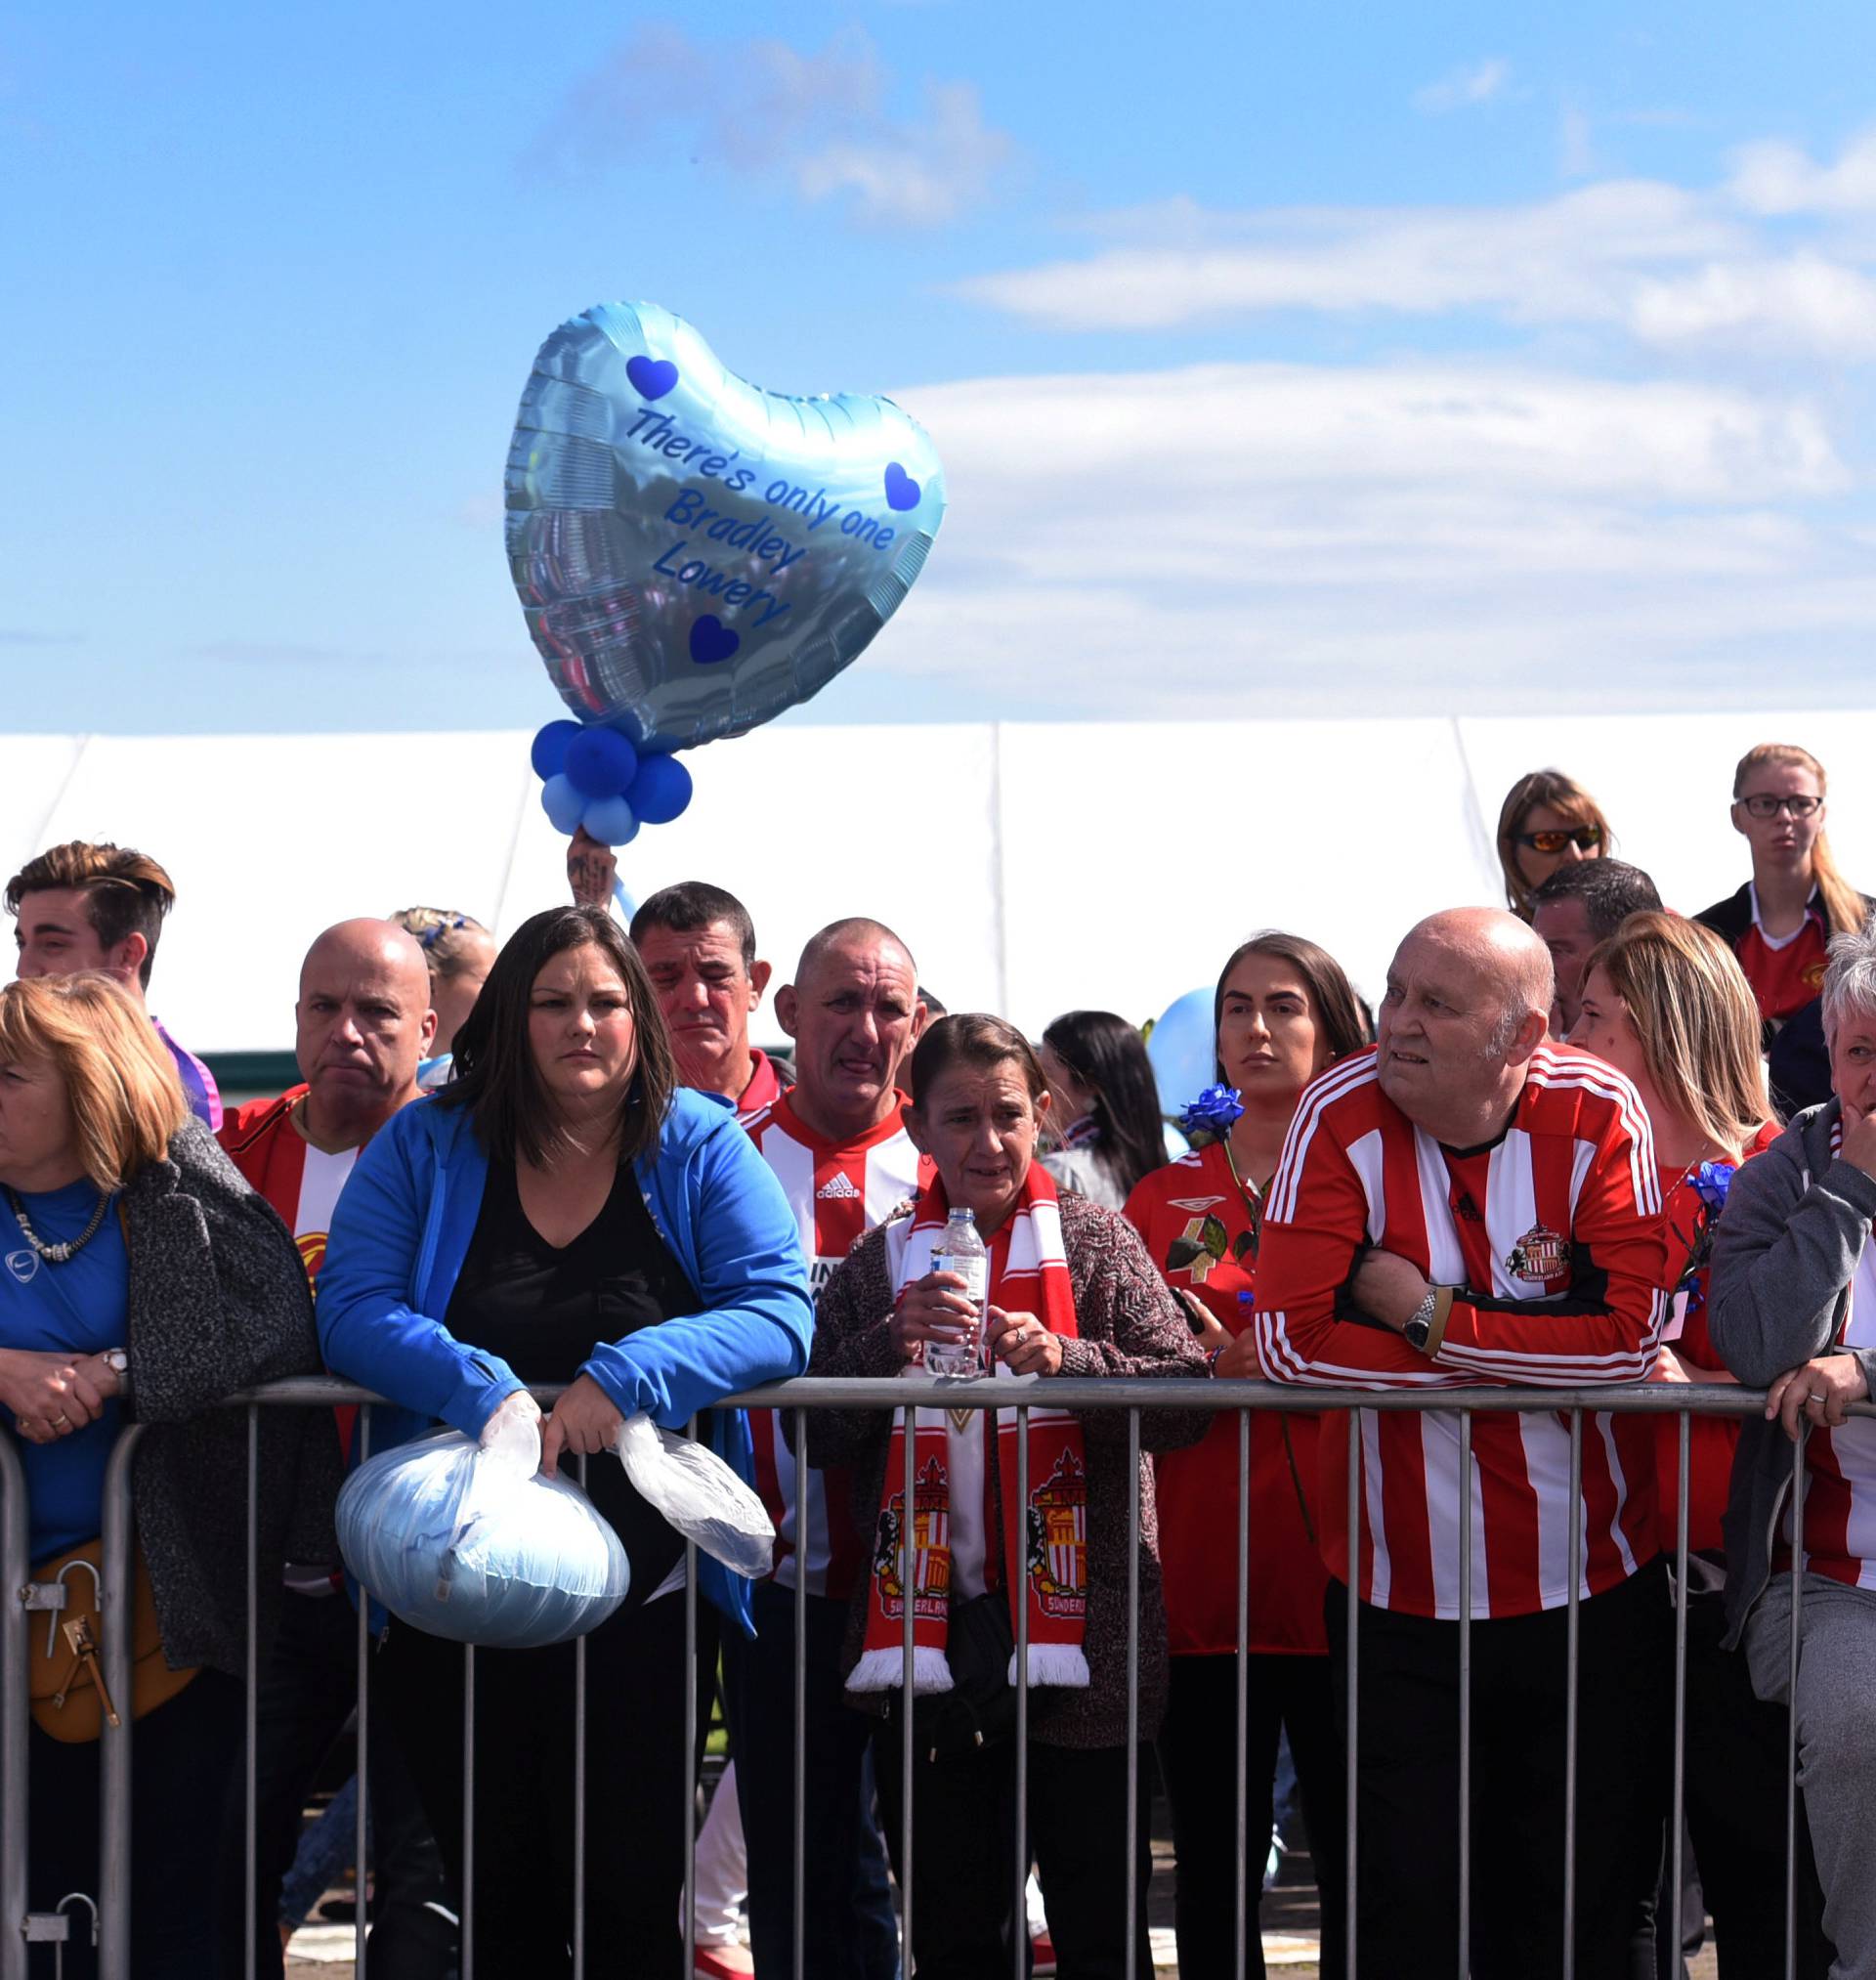 Football fans and wellwishers gather ahead of the funeral of Bradley Lowery